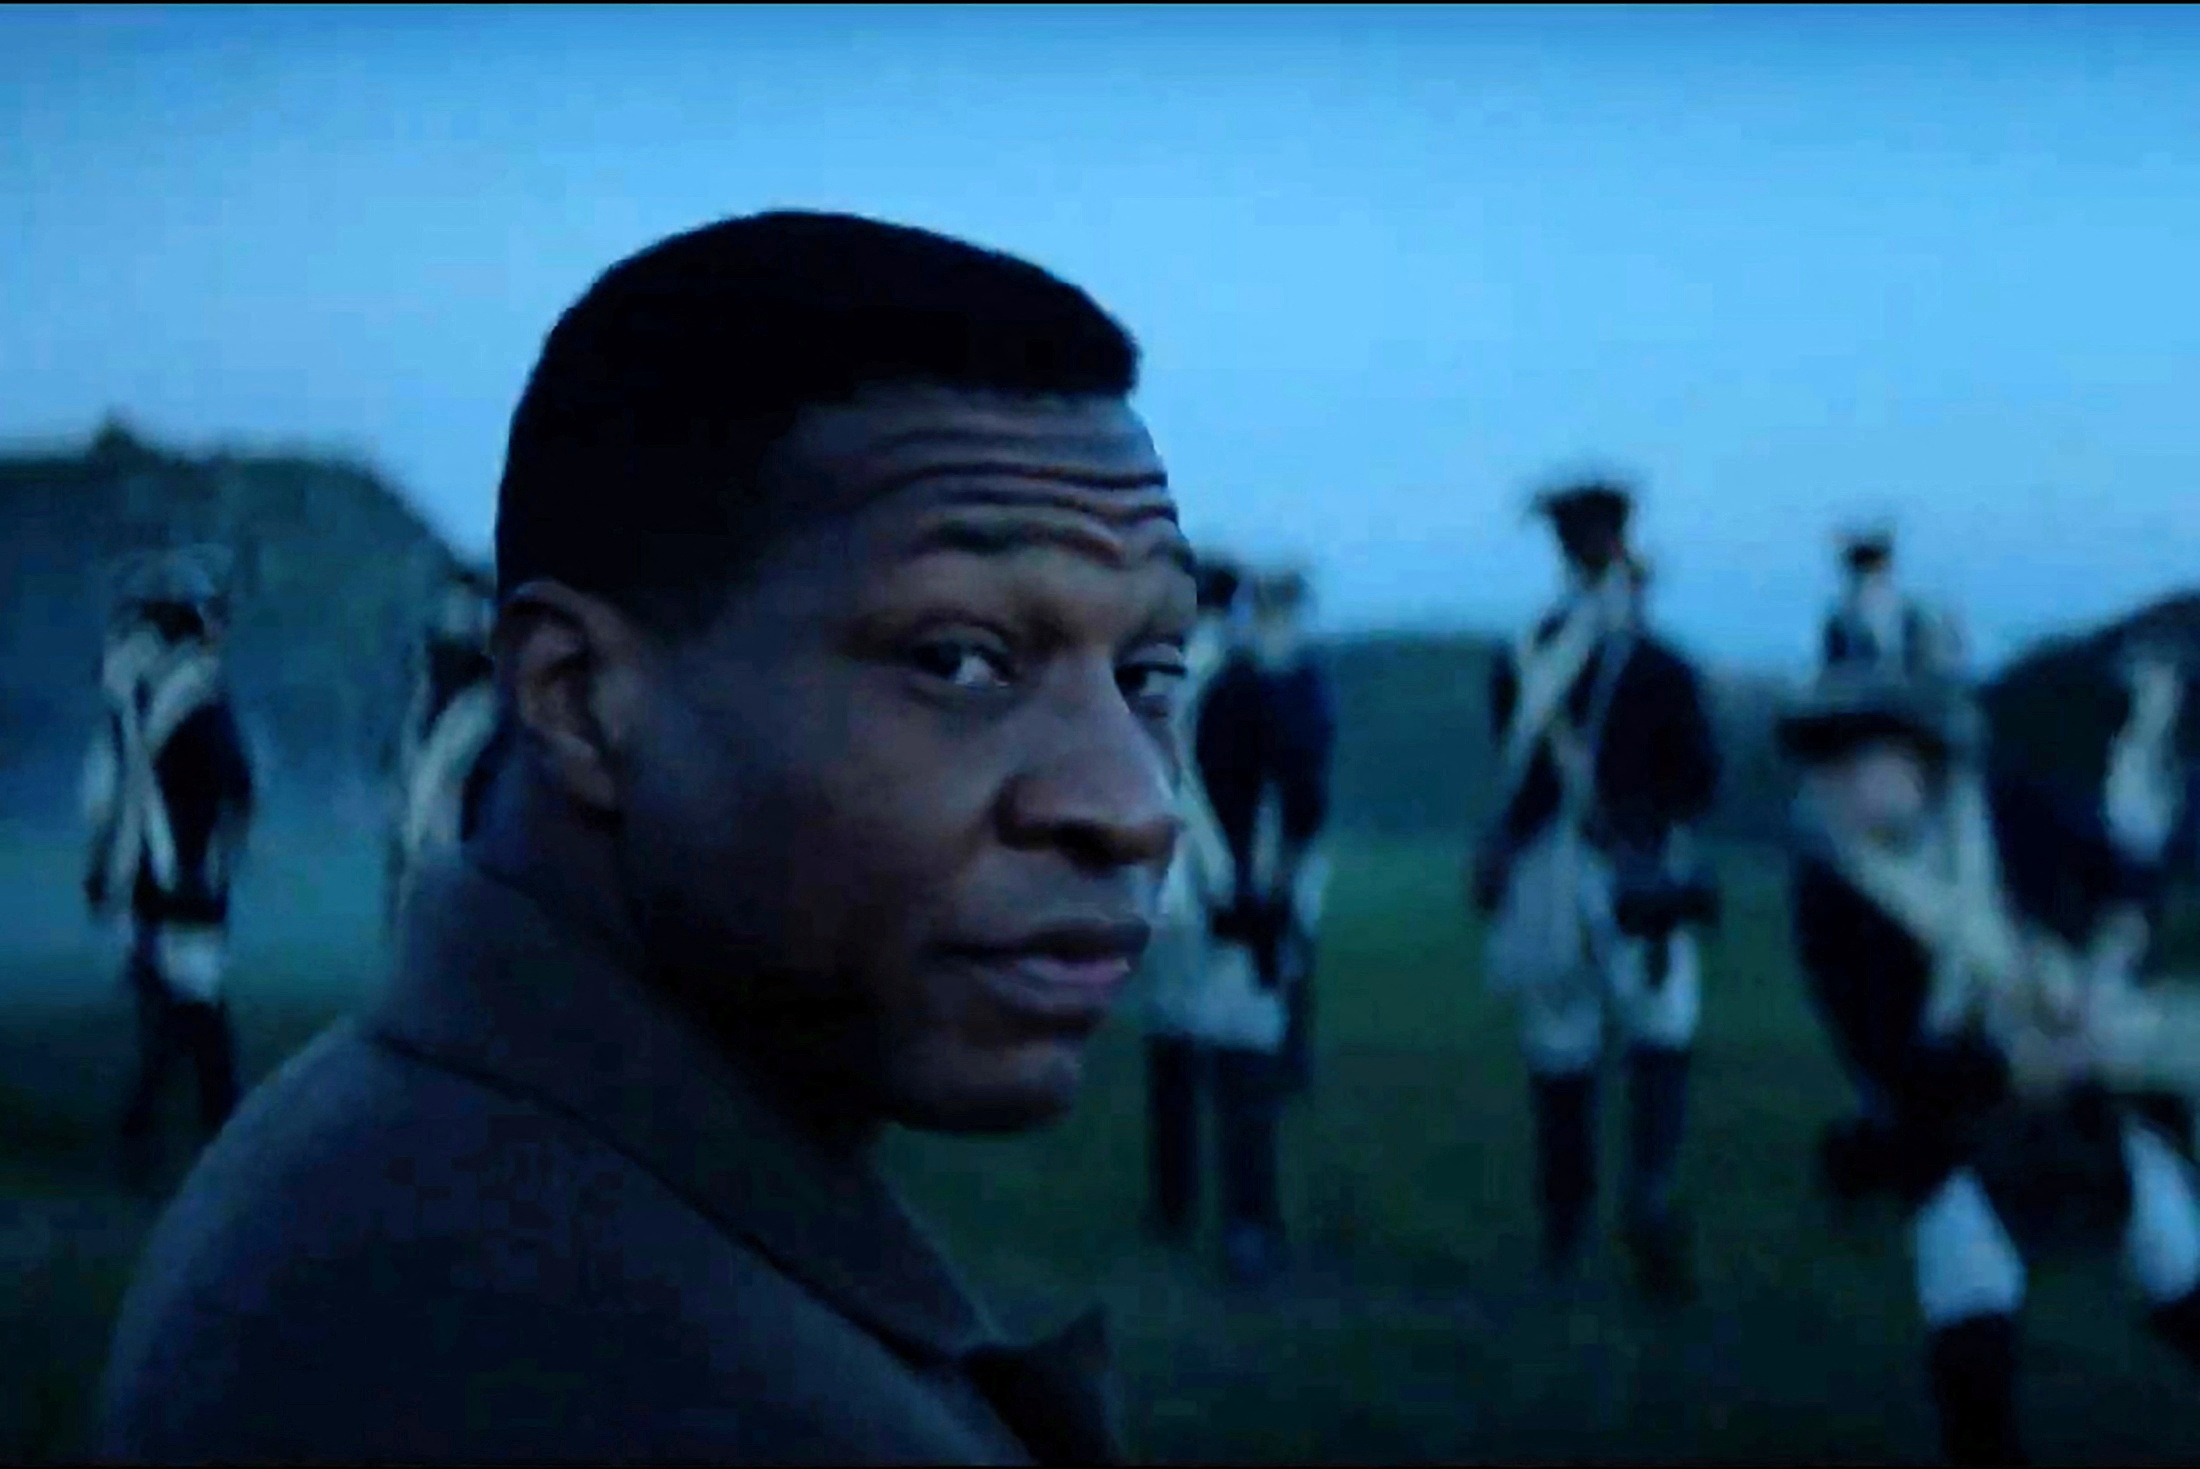 Actor Jonathan Majors appears in a recent U.S. Army "Be All You Can Be" recruitment advertisement